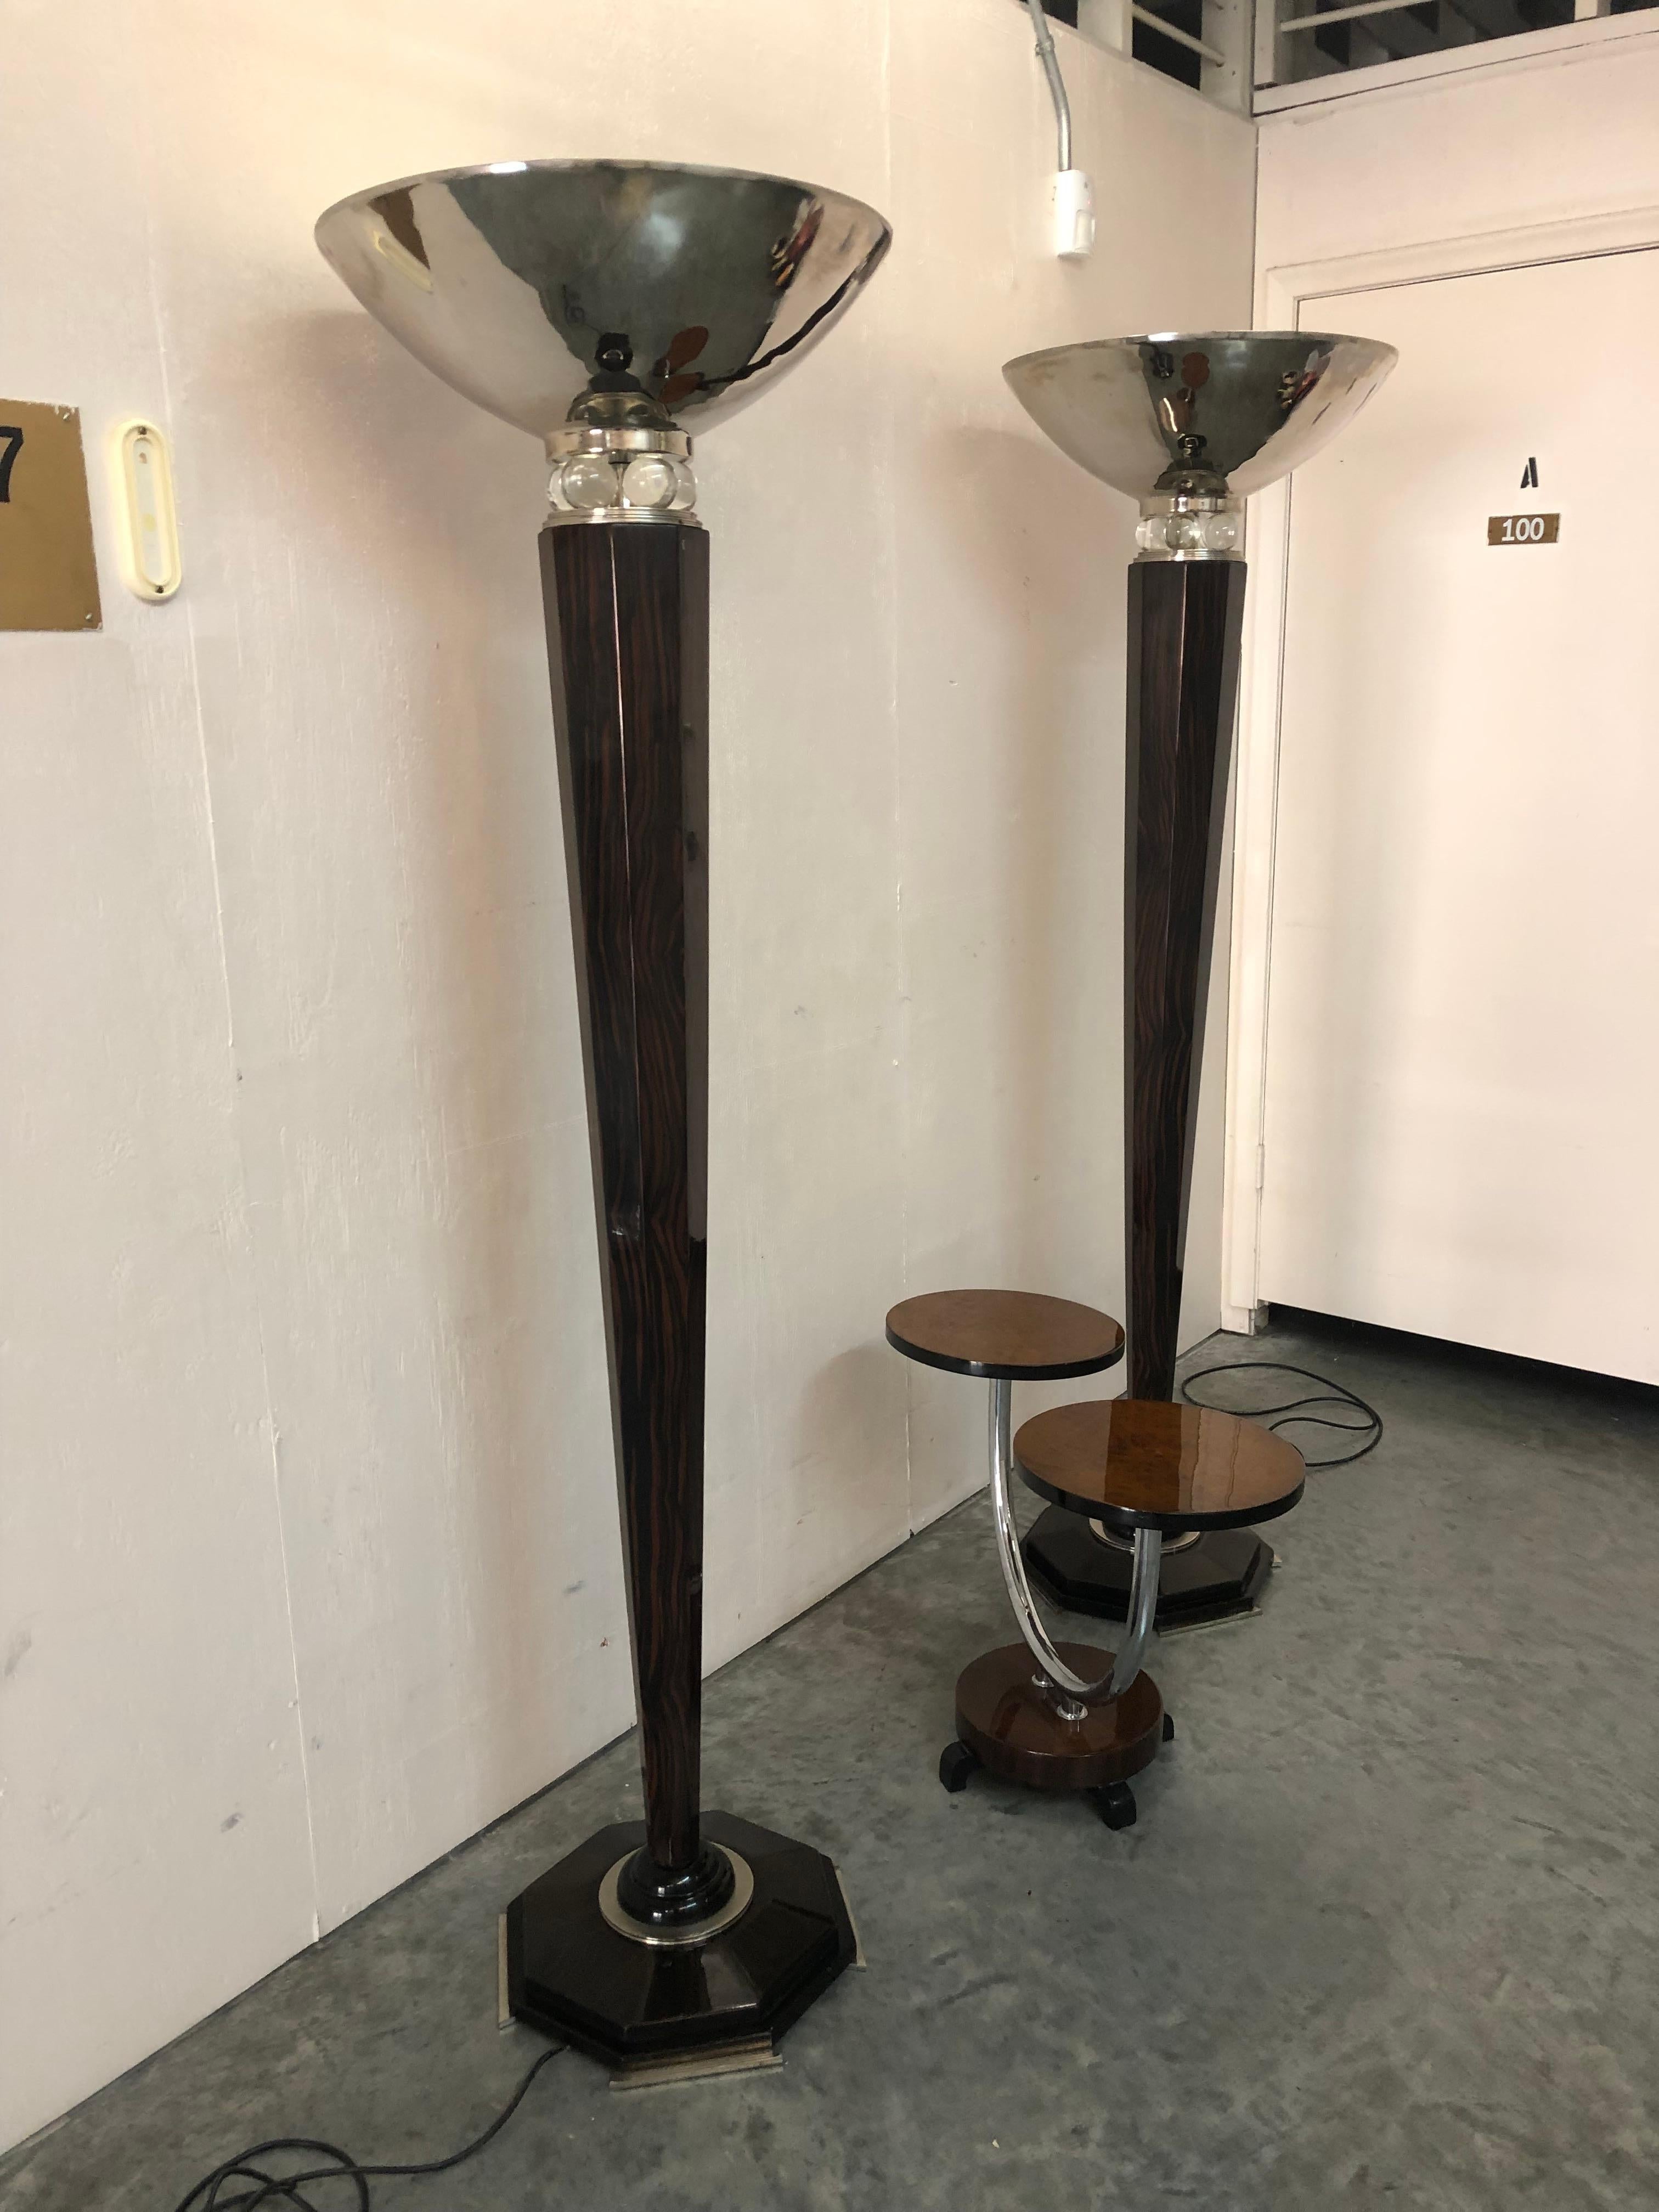 2 floor lamps Art Deco

Materials: wood, glass, chrome
France
1920
You want to live in the golden years, those are the floor lamps that your project needs.
We have specialized in the sale of Art Deco and Art Nouveau styles since 1982.
Pushing the